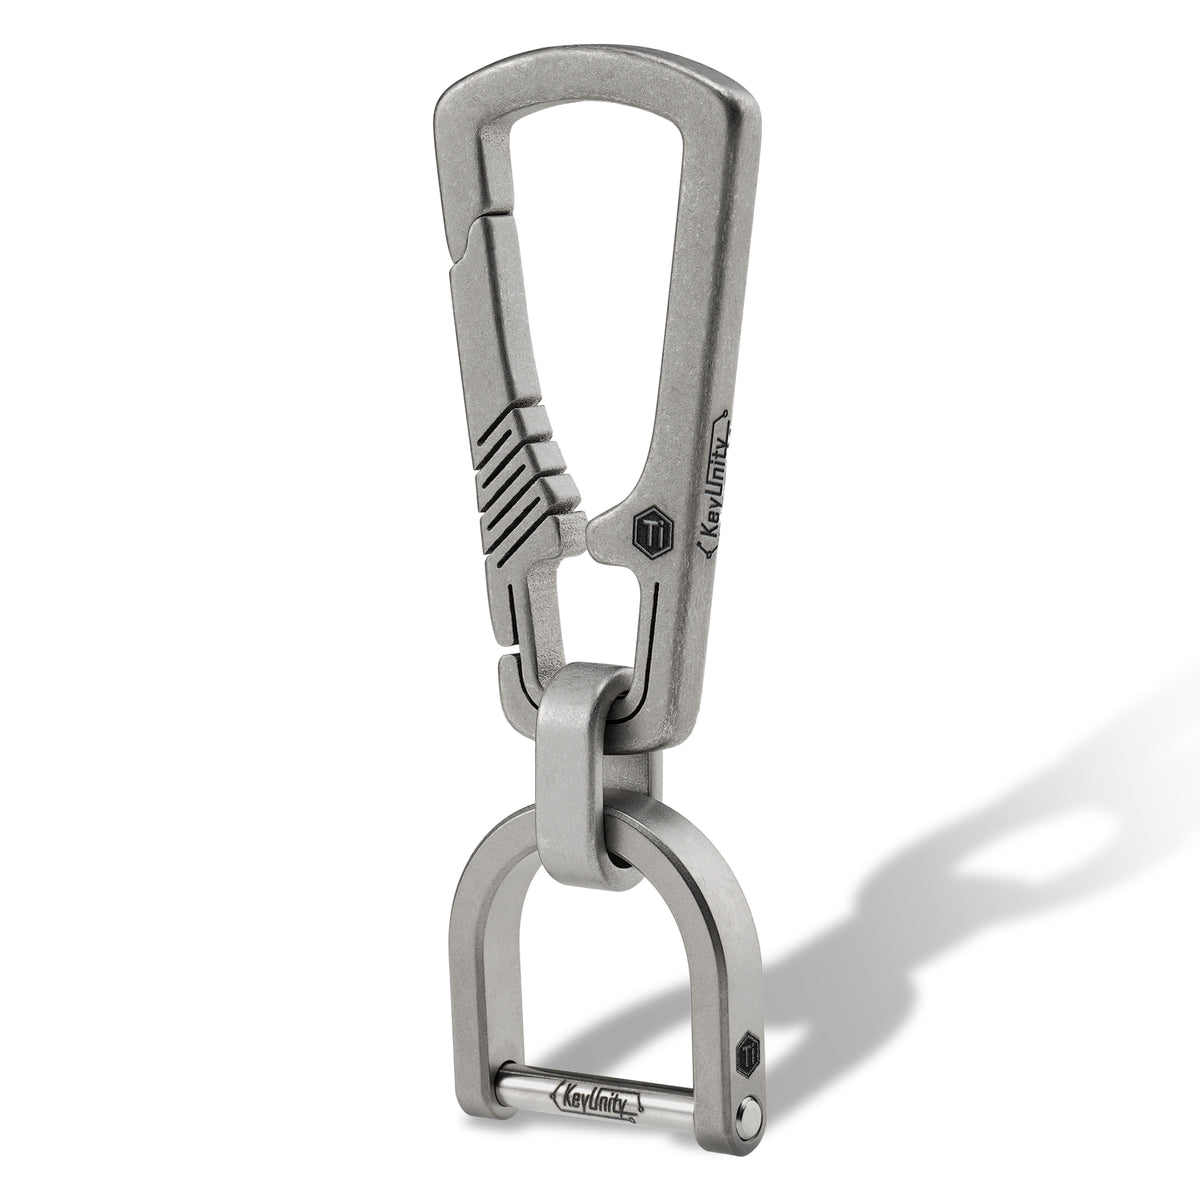 KM17 Titanium EDC Carabiner Keychain Clip with D Ring